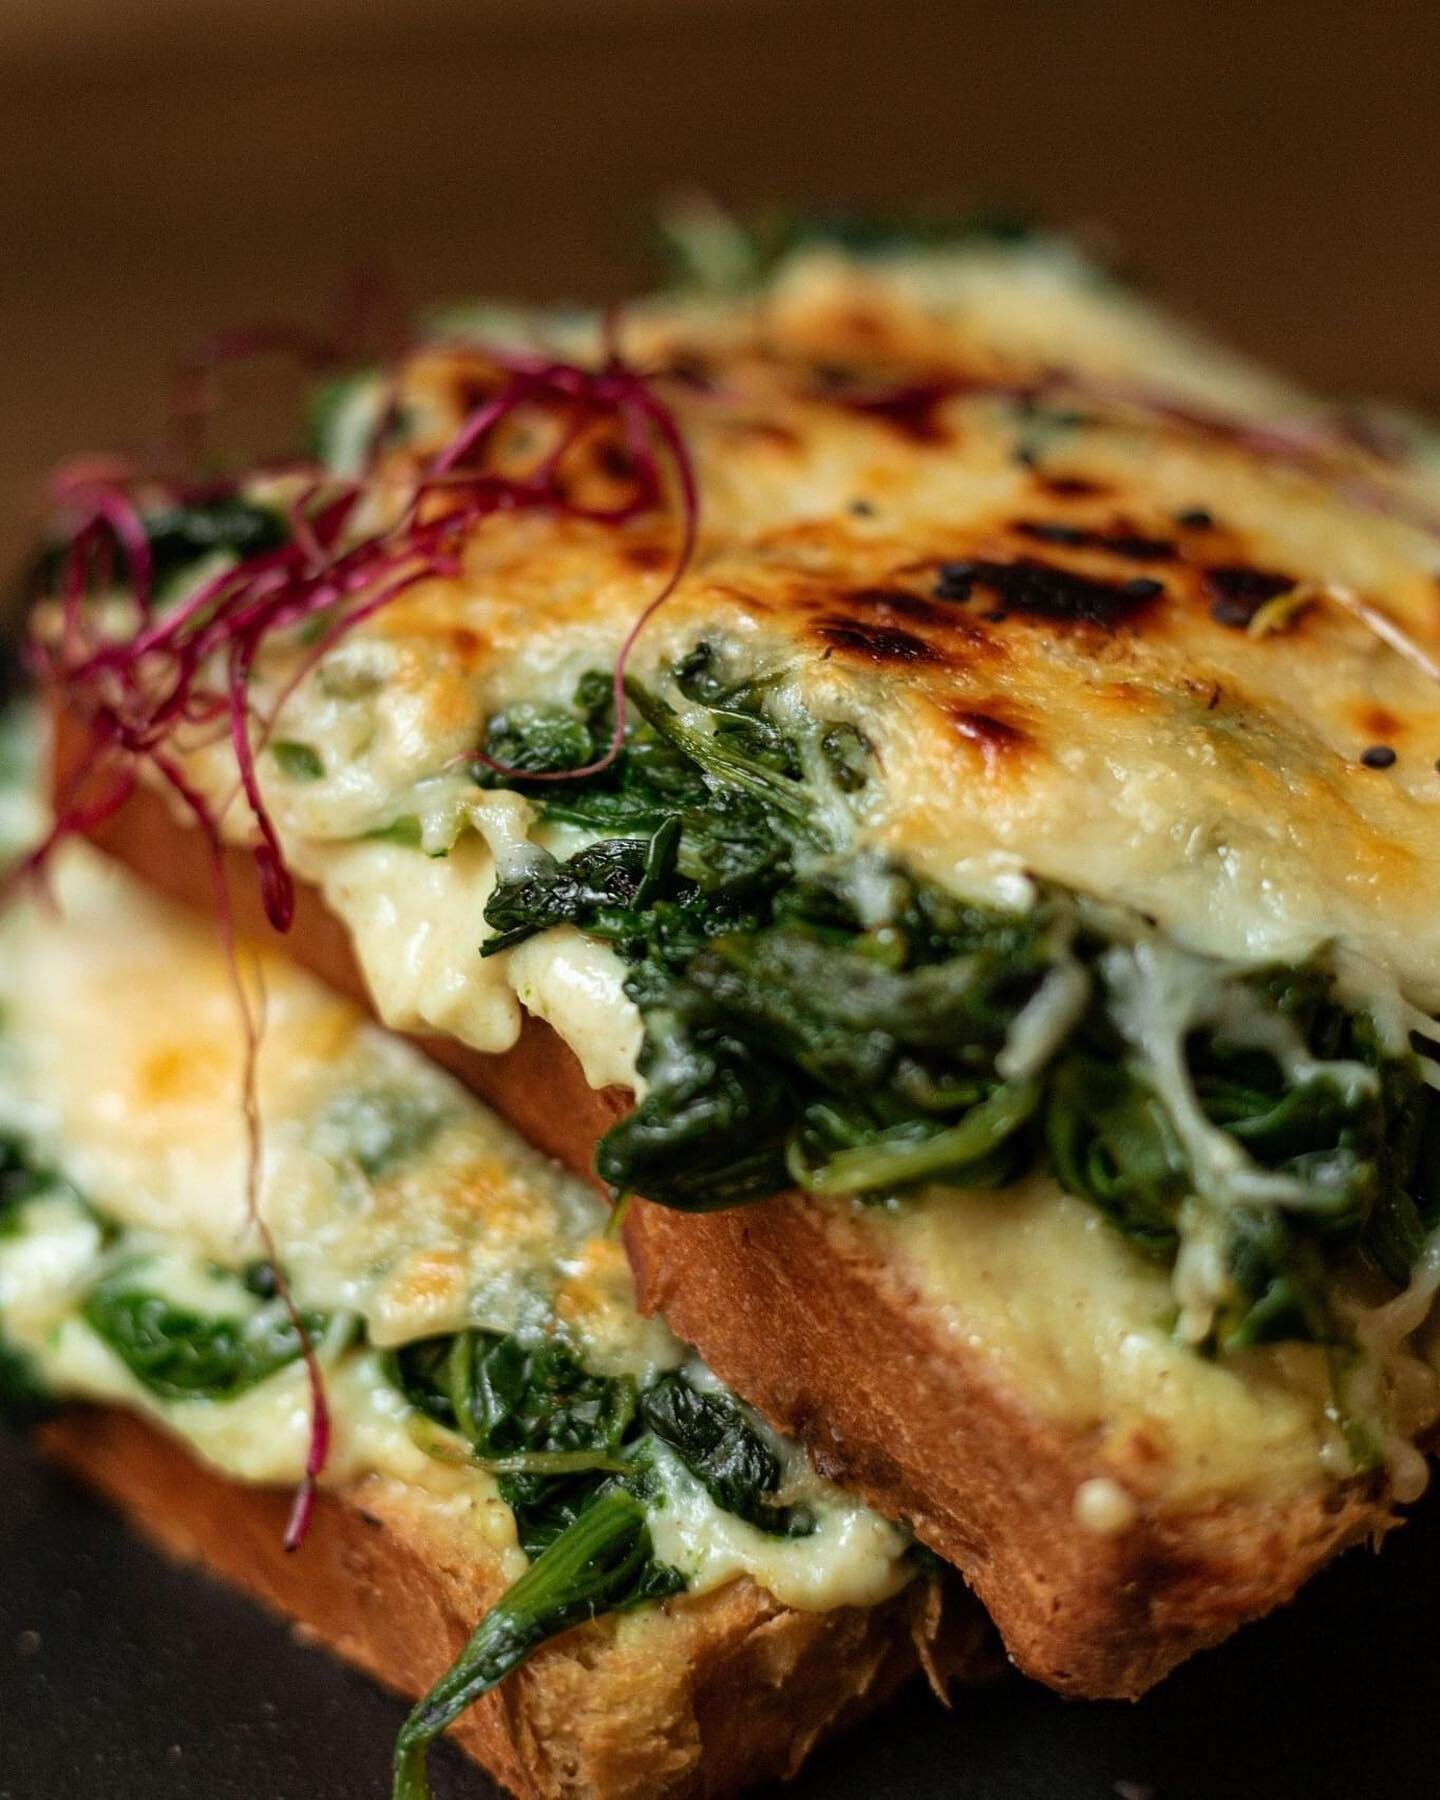 Just take a closer look at the Croque Florentine with spinach, cheese and b&eacute;chamel! 🫣
#atableboulangeriepatisserie